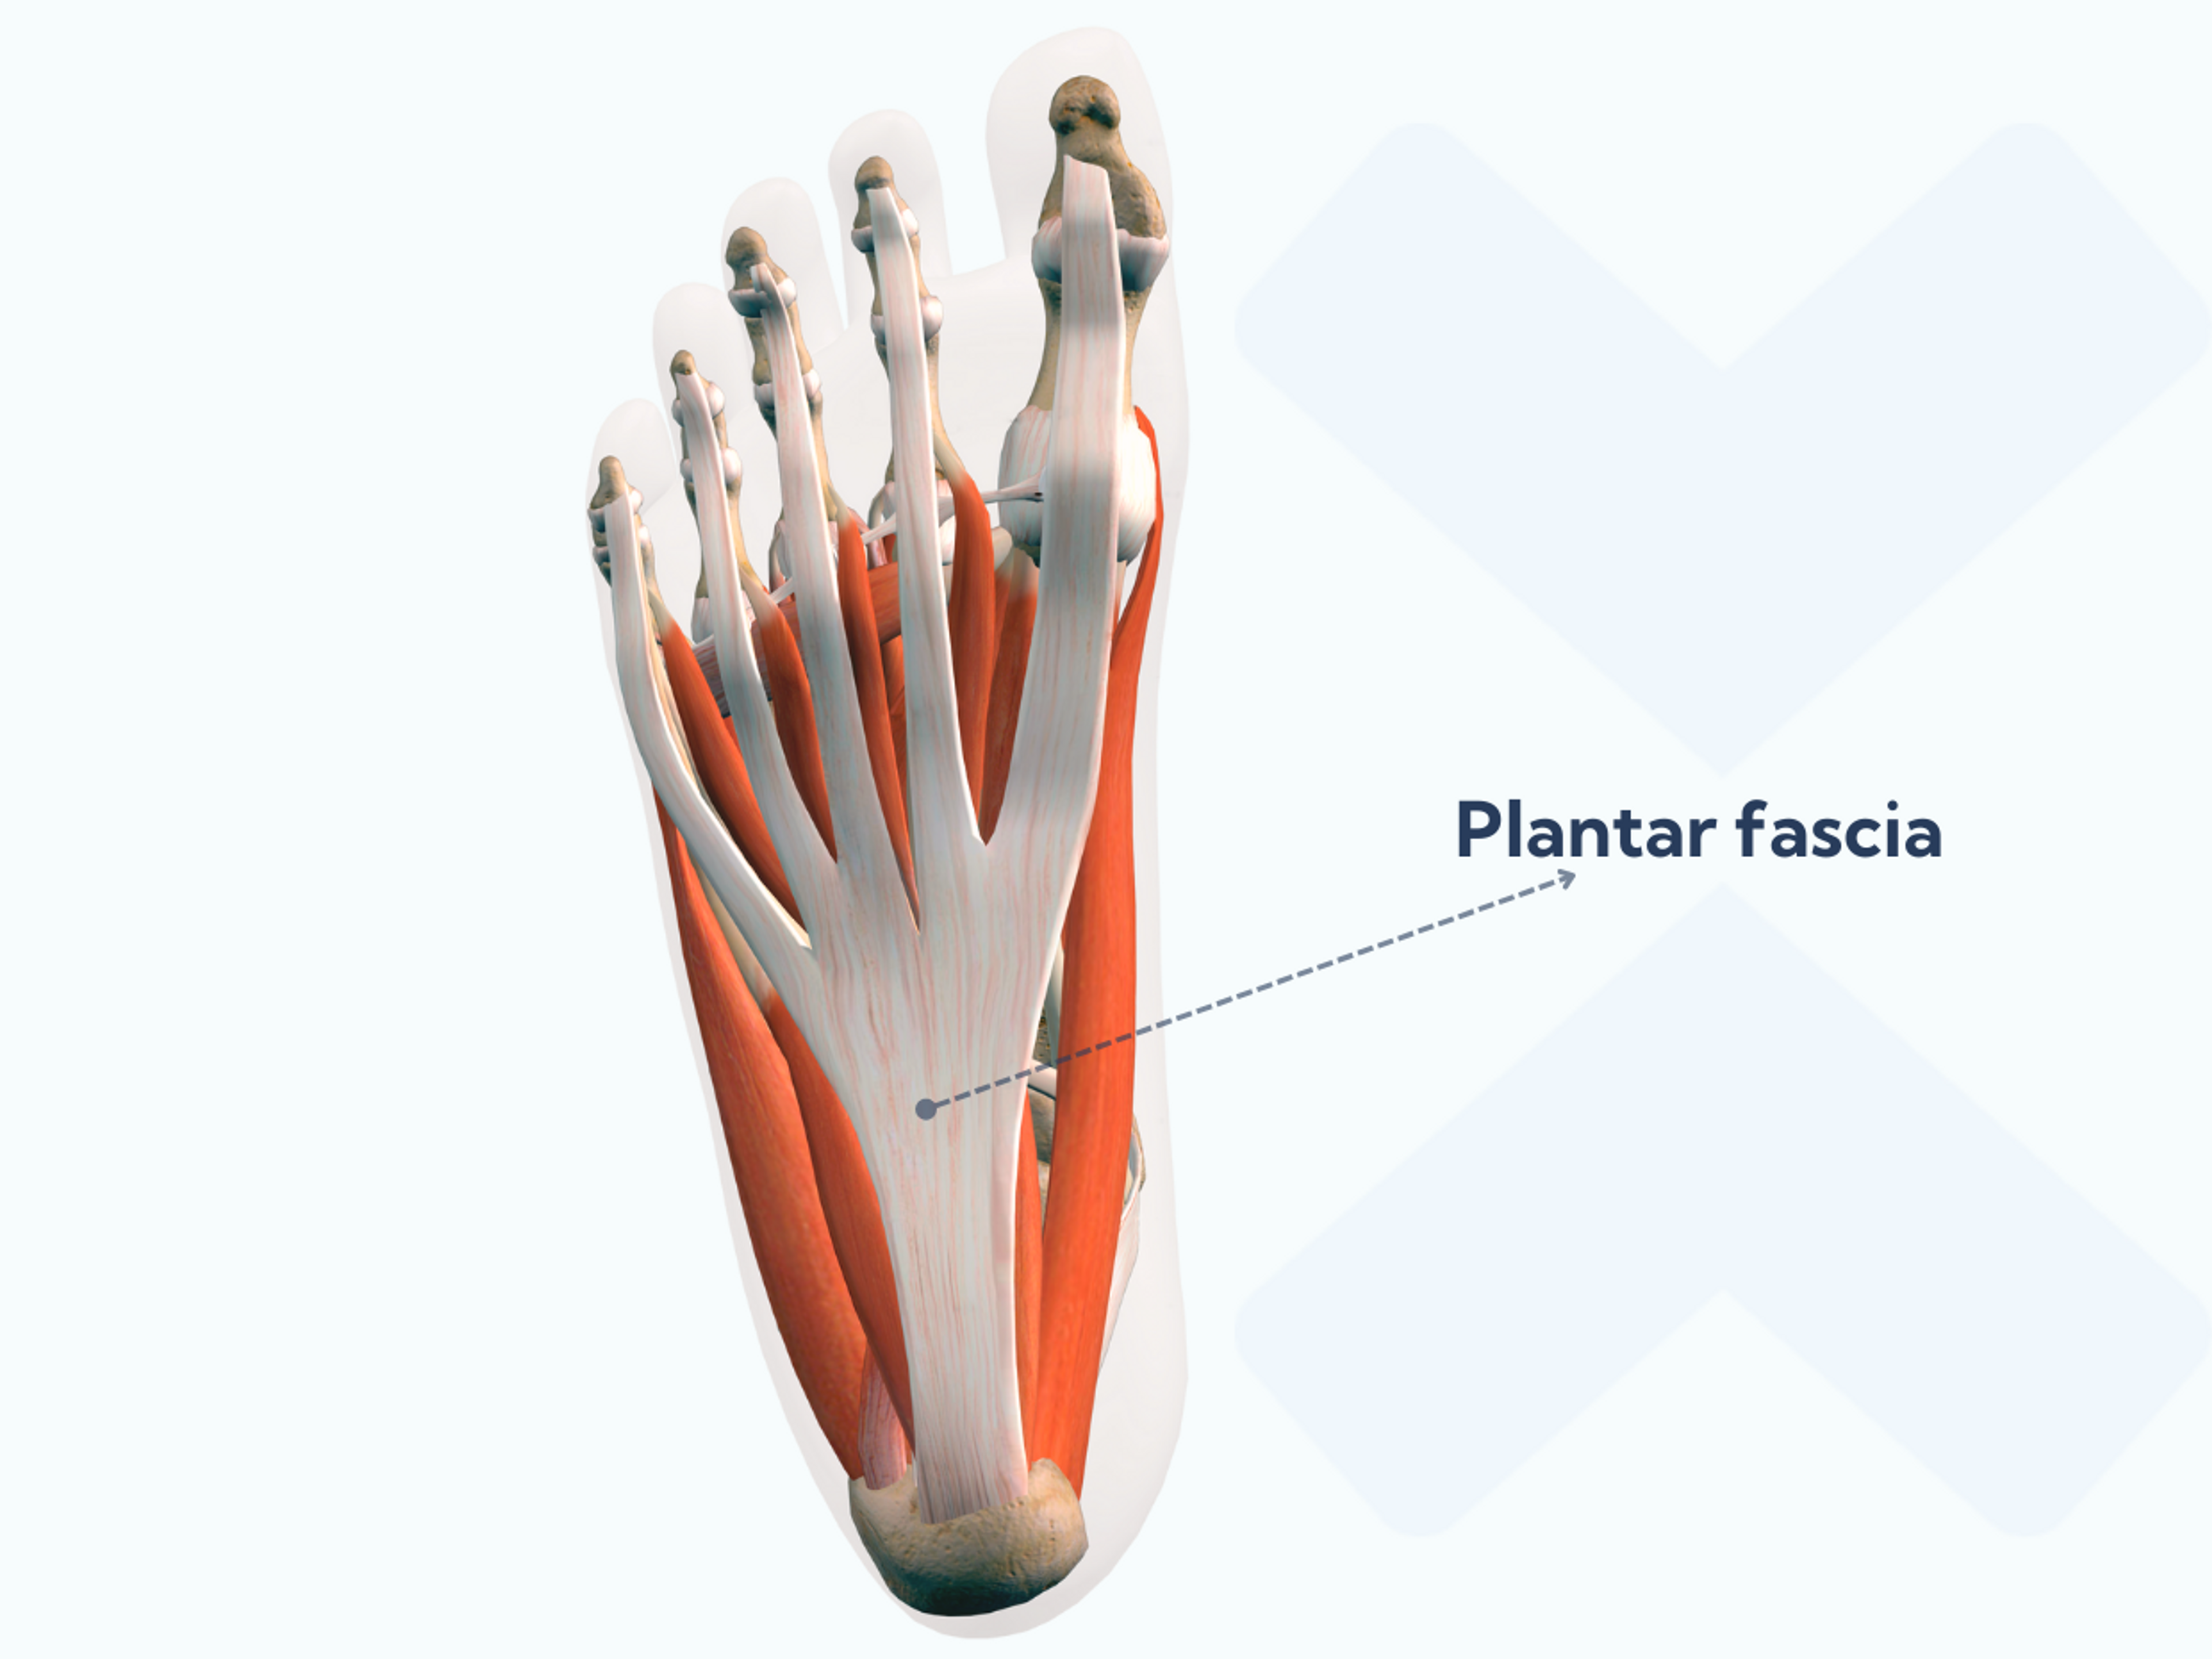 You feel the pain from plantar fasciitis on the medial attachment to the heel bone.